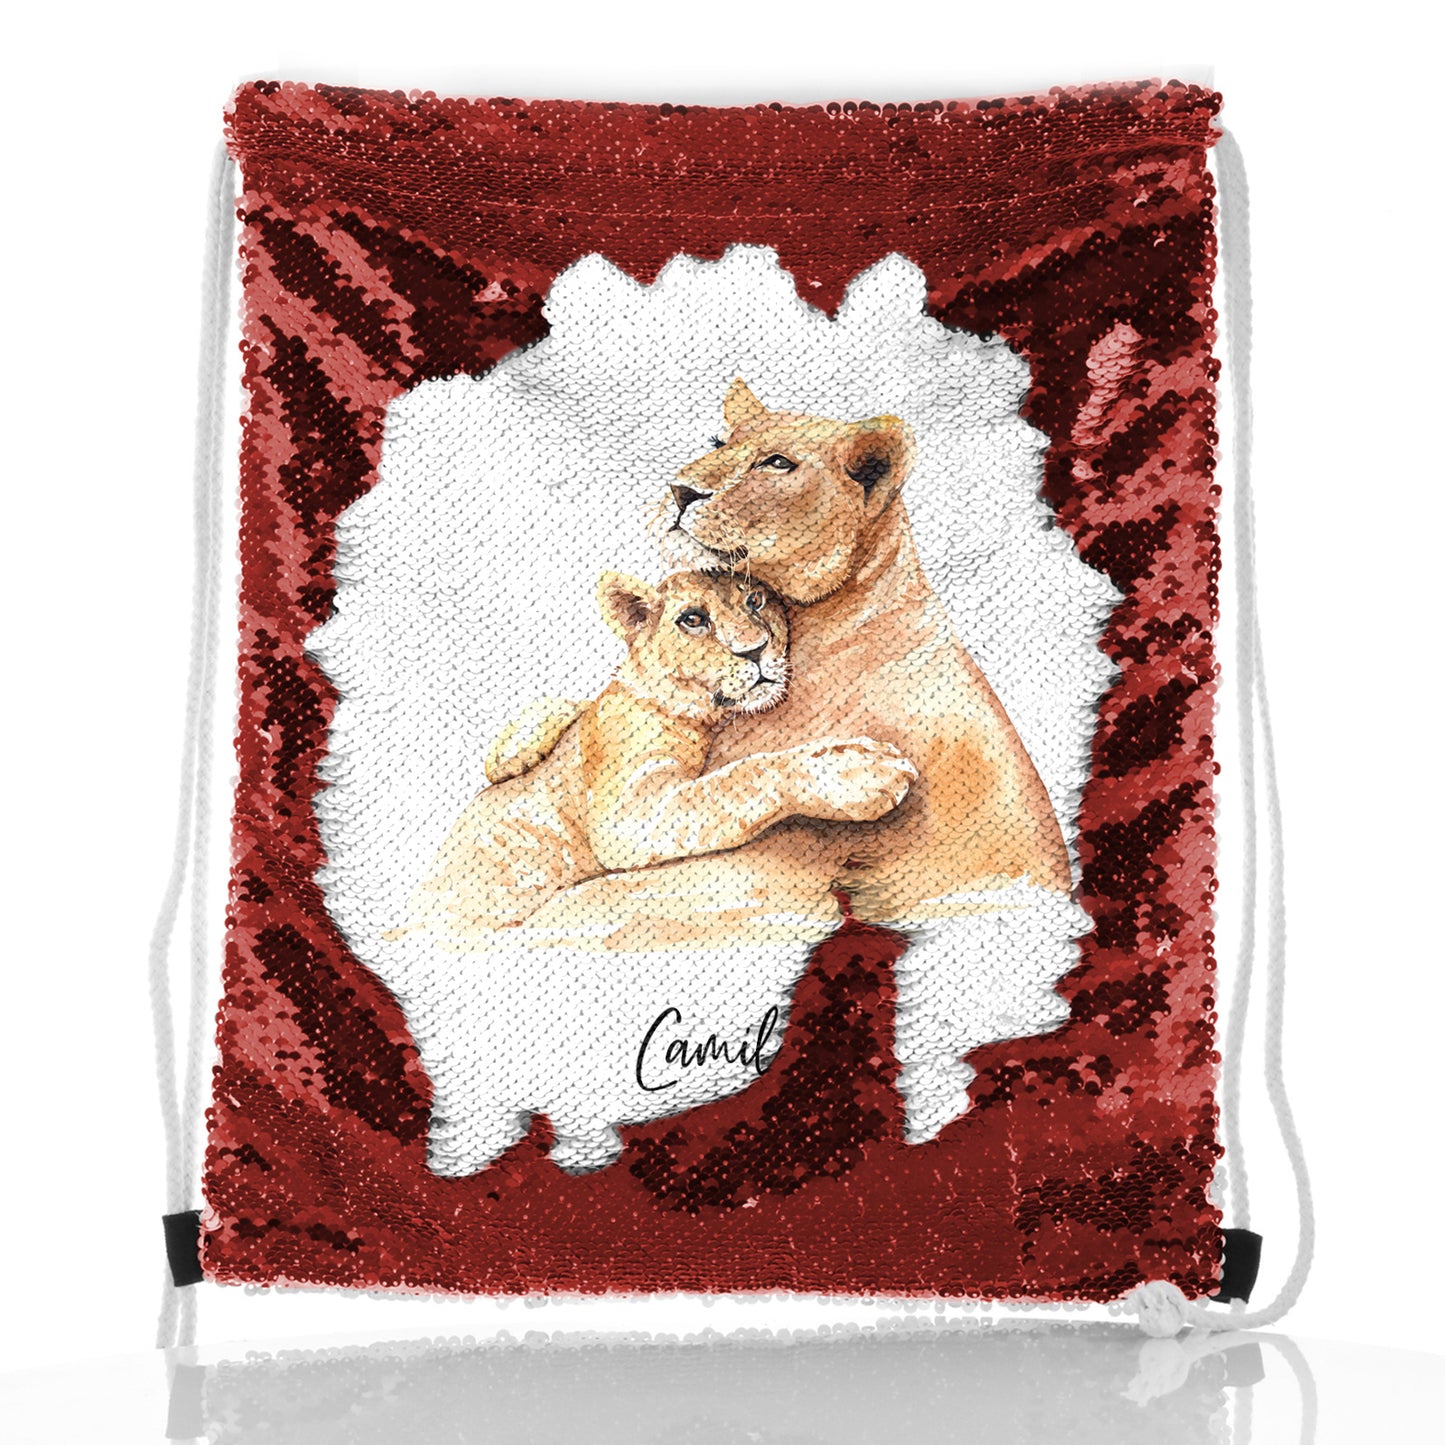 Personalised Sequin Drawstring Backpack with Welcoming Text and Embracing Mum and Baby Lions